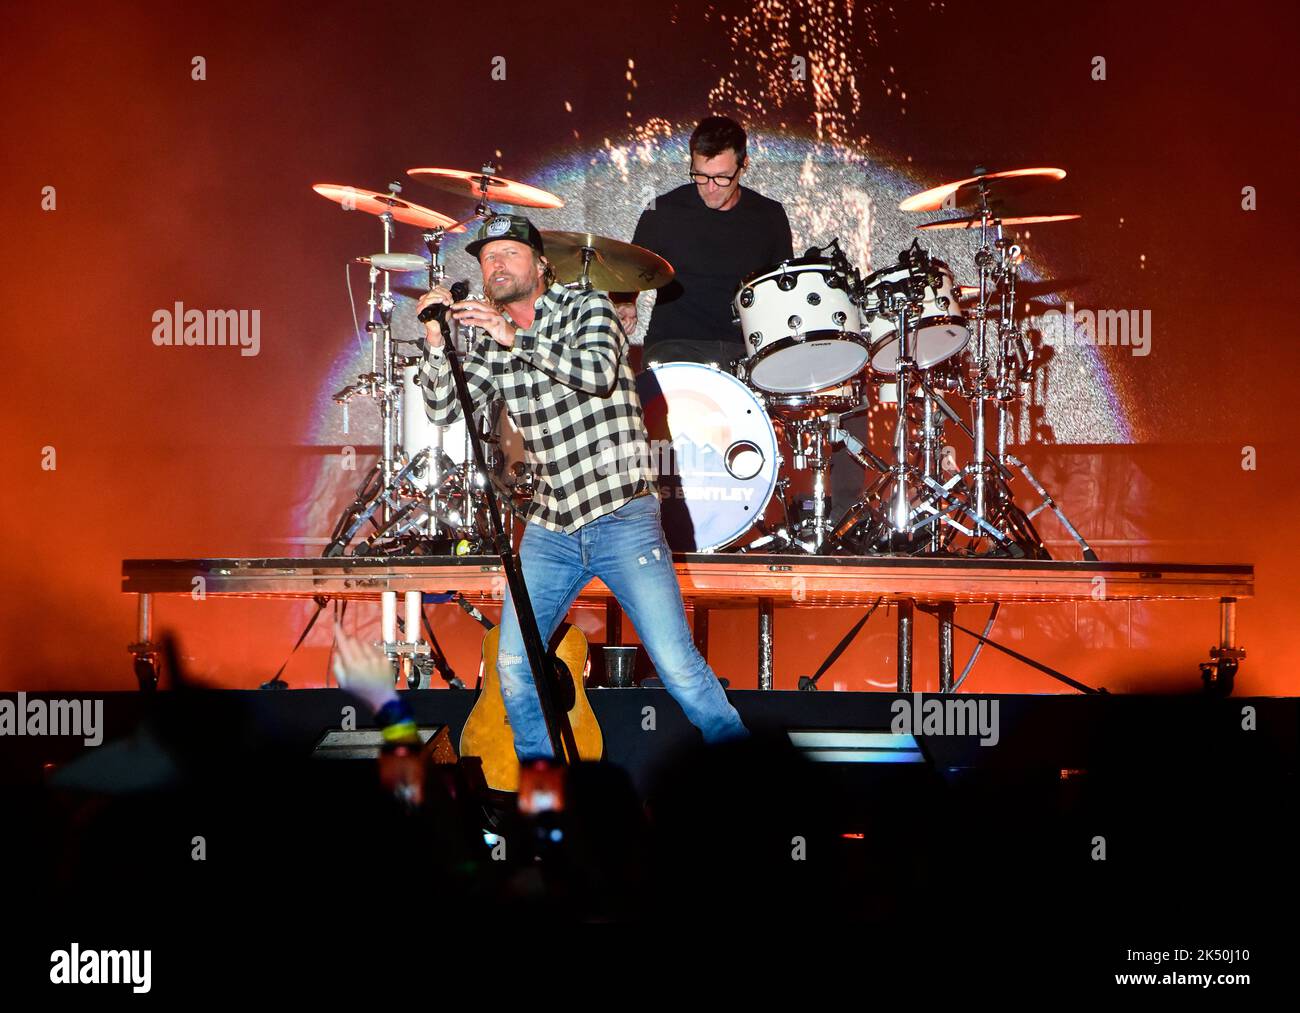 Redondo Beach, California September 17, 2022 - Dierks Bentley performing on stage at BeachLife Ranch, Credit - Ken Howard/Alamy Stock Photo